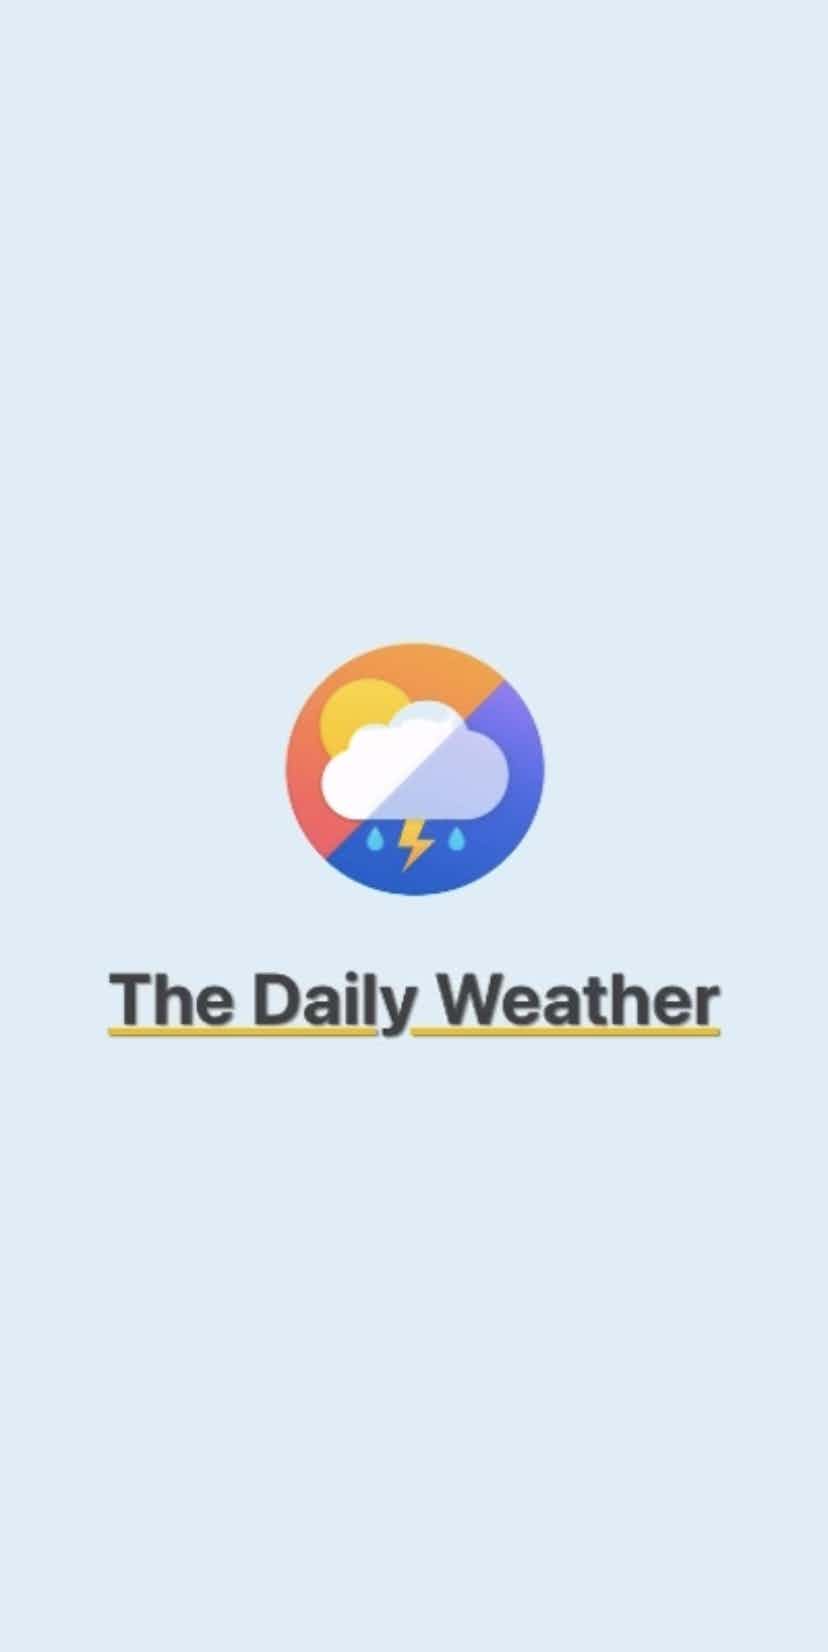 The Daily Weather